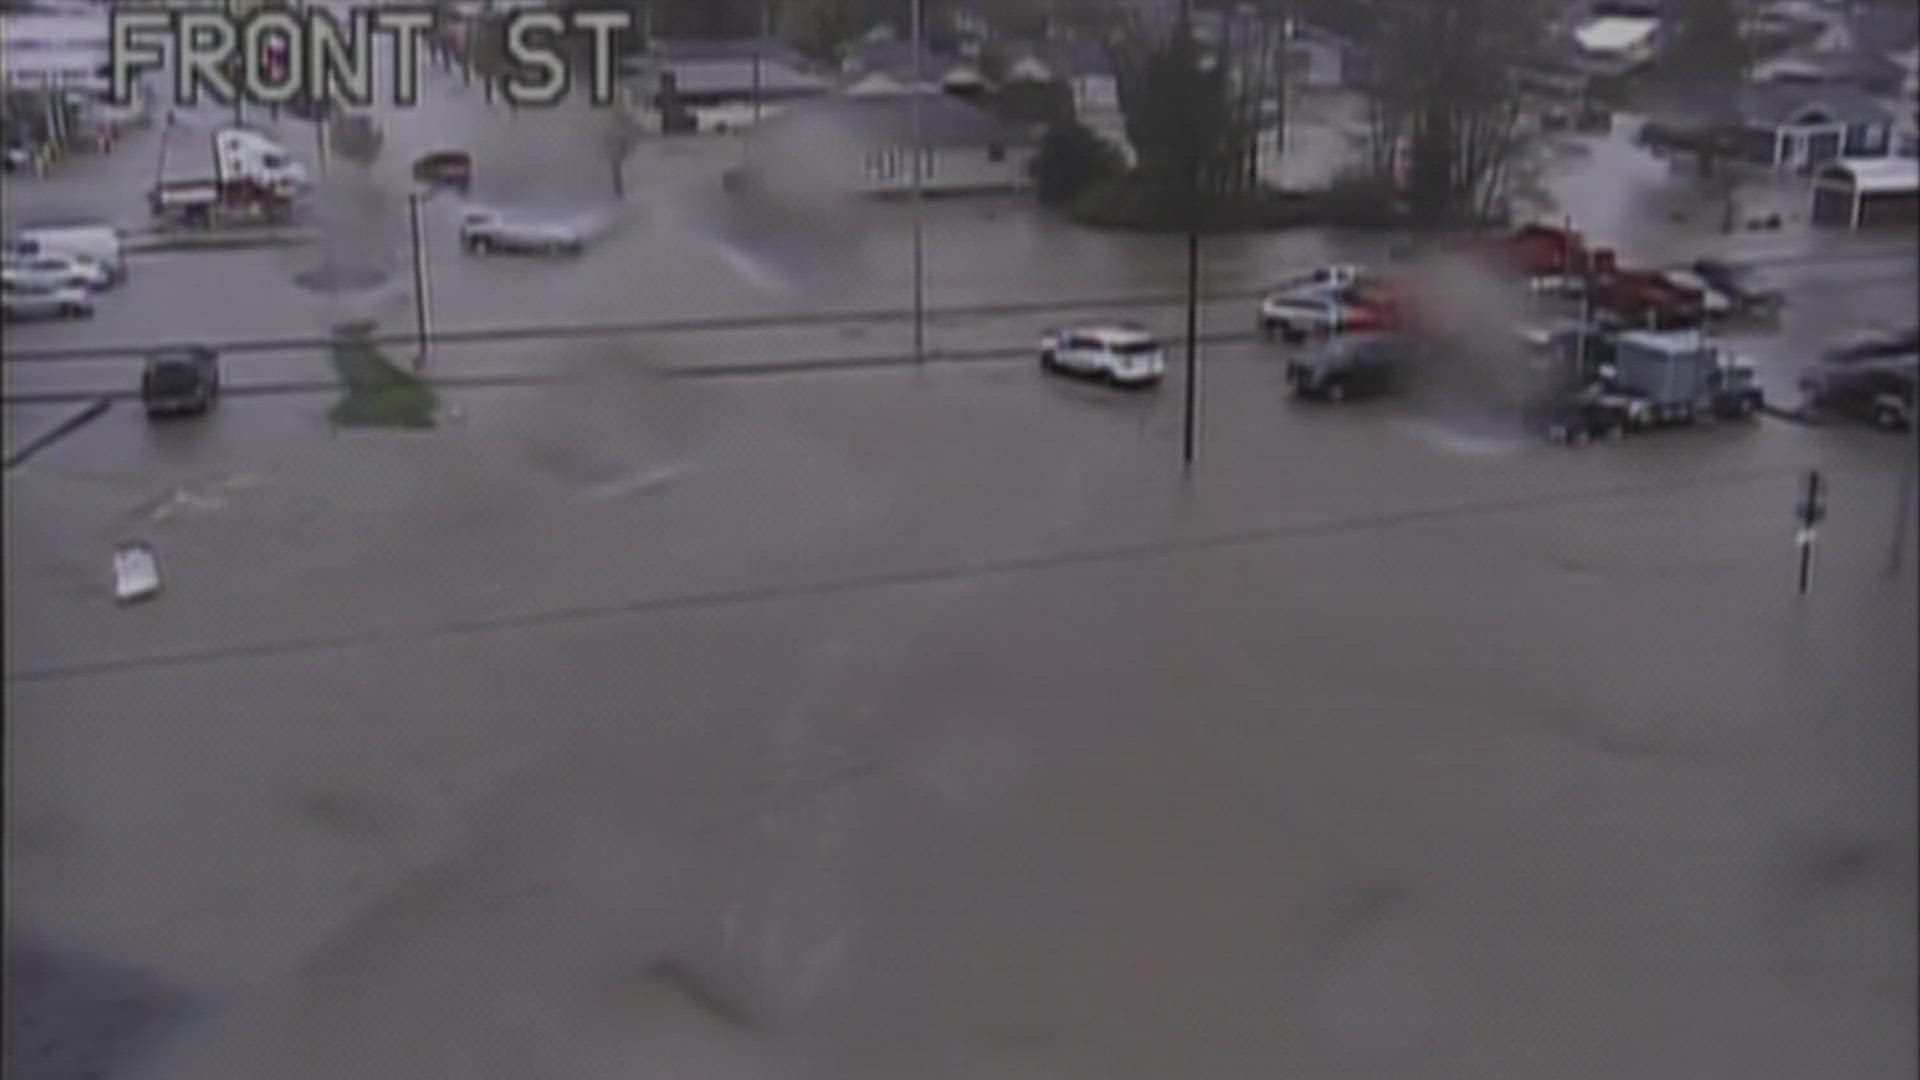 WSDOT cameras captured a look at severely flooded streets in Sumas, WA after days of heavy rain